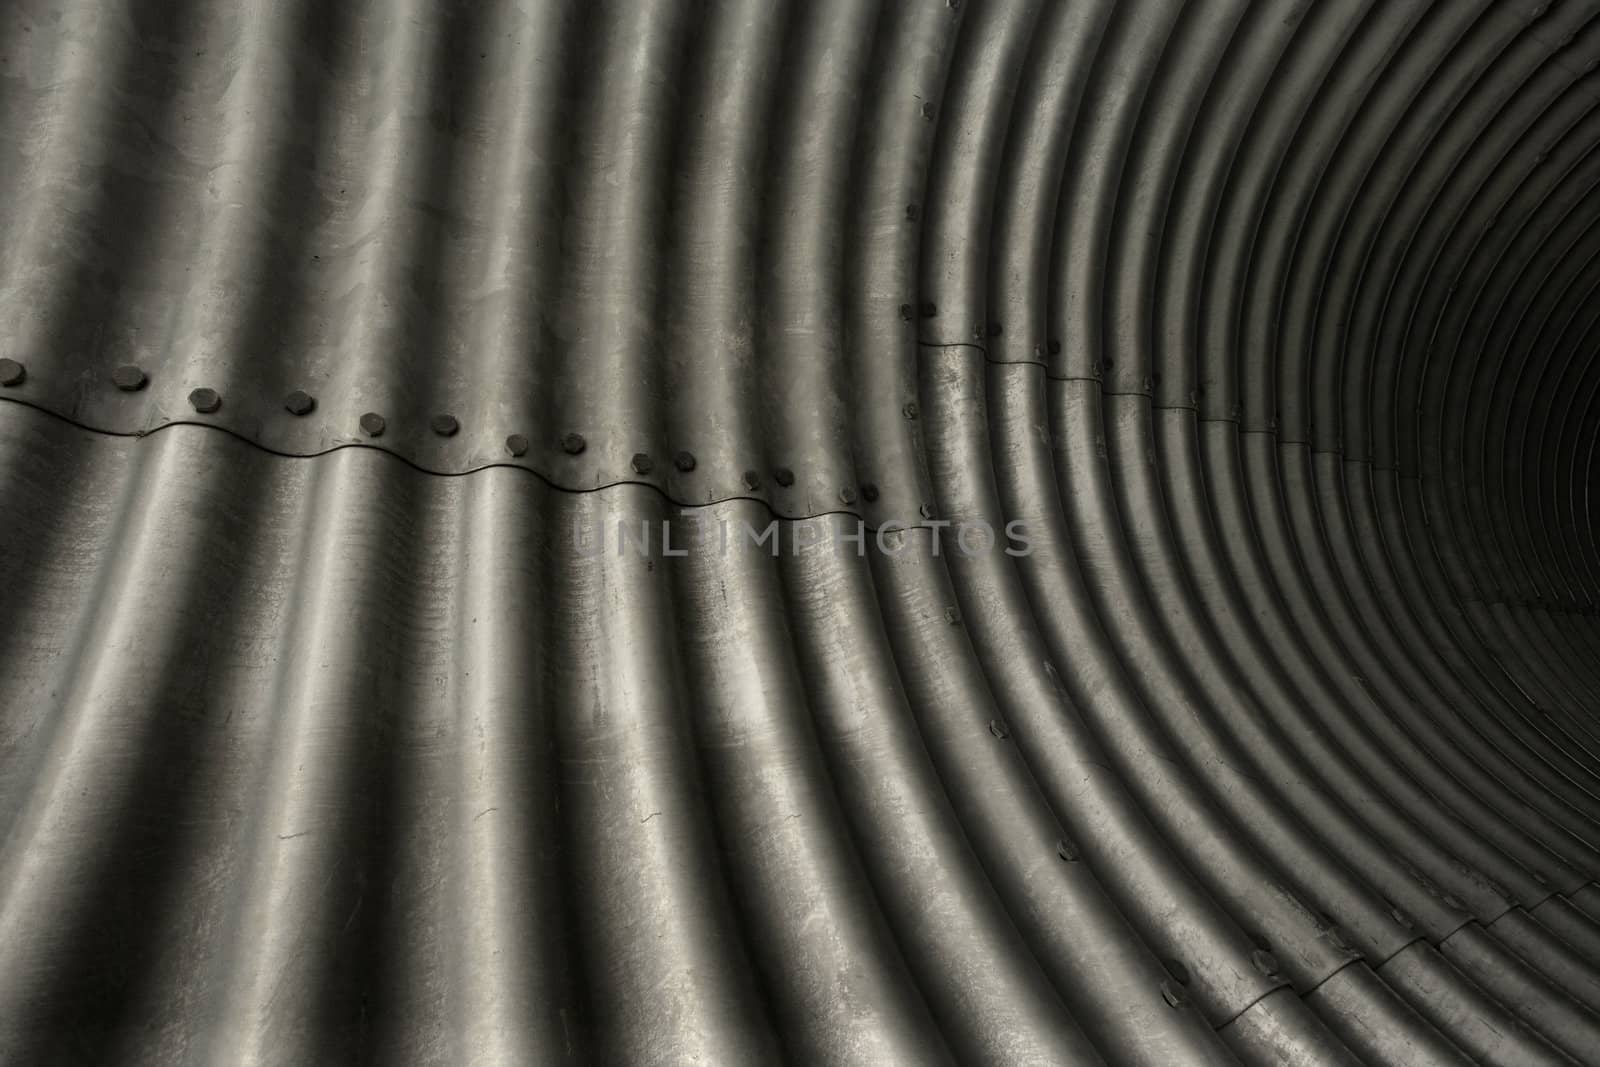 An abstract image of steel plate used for tunnels.
